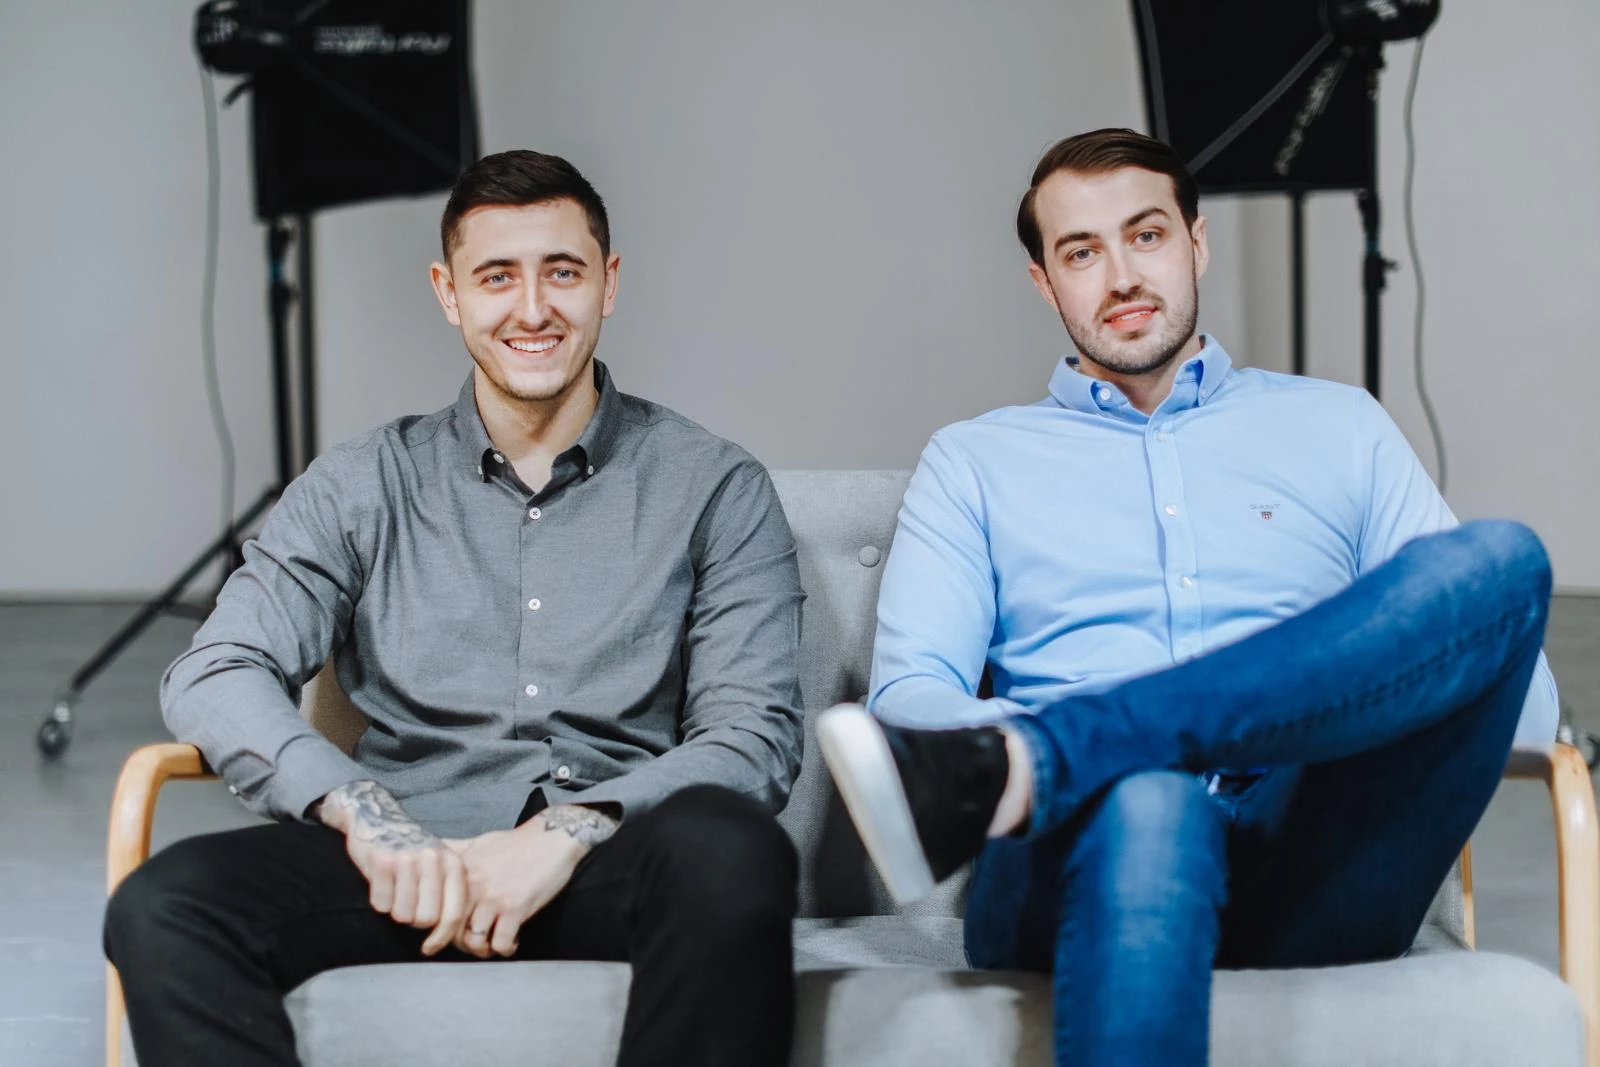 George Cowin and Ryan O'Shea - Cowshed Social's co-founders